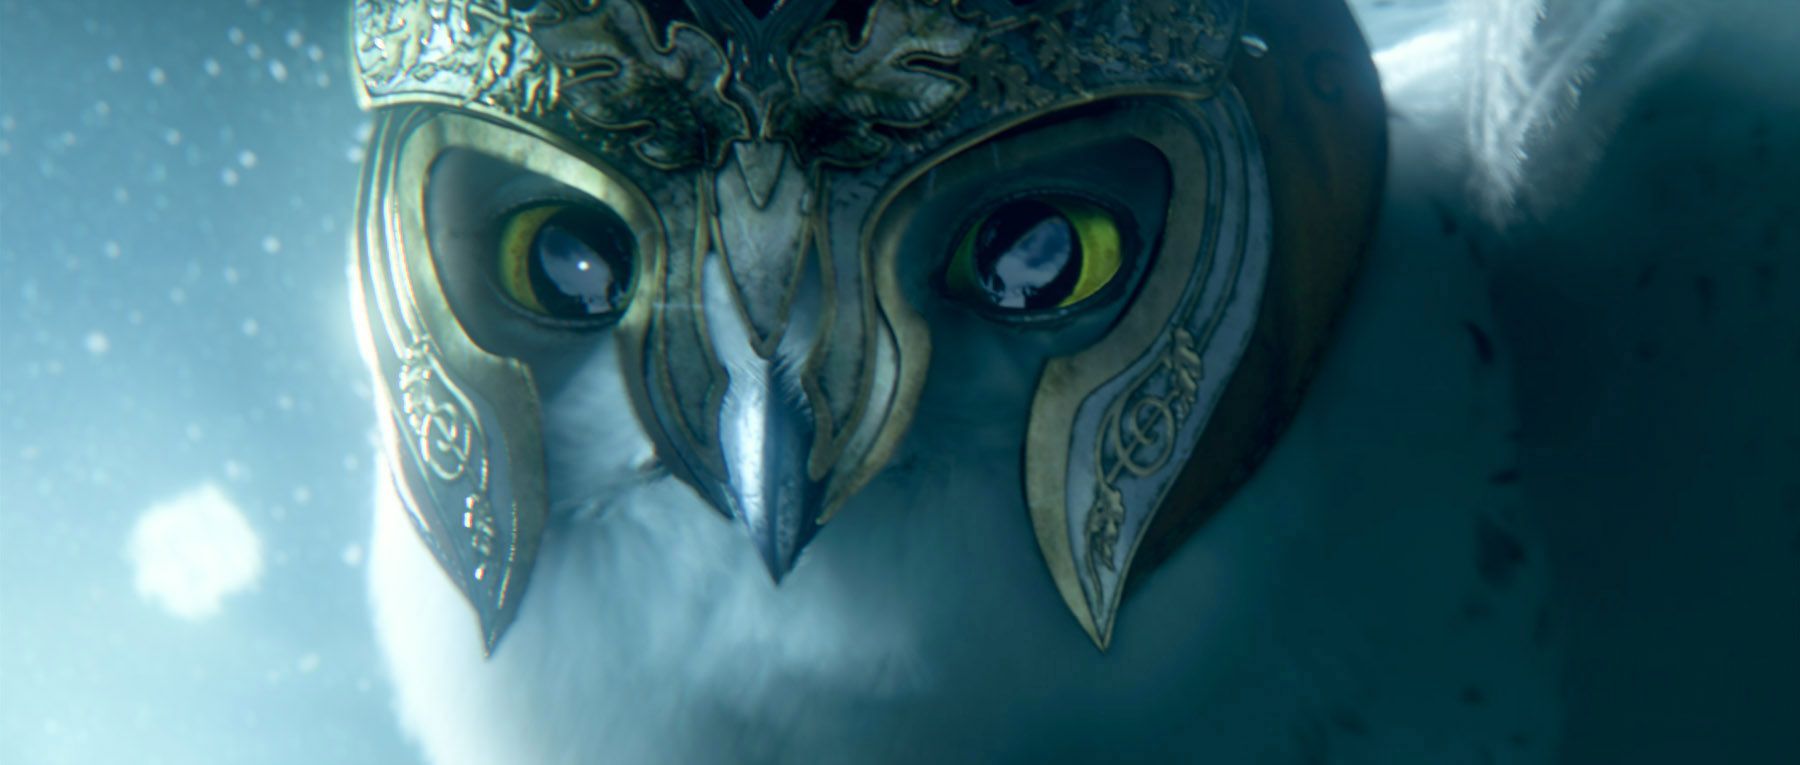 Legend of the Guardians: The Owls of Ga'Hoole Image #1